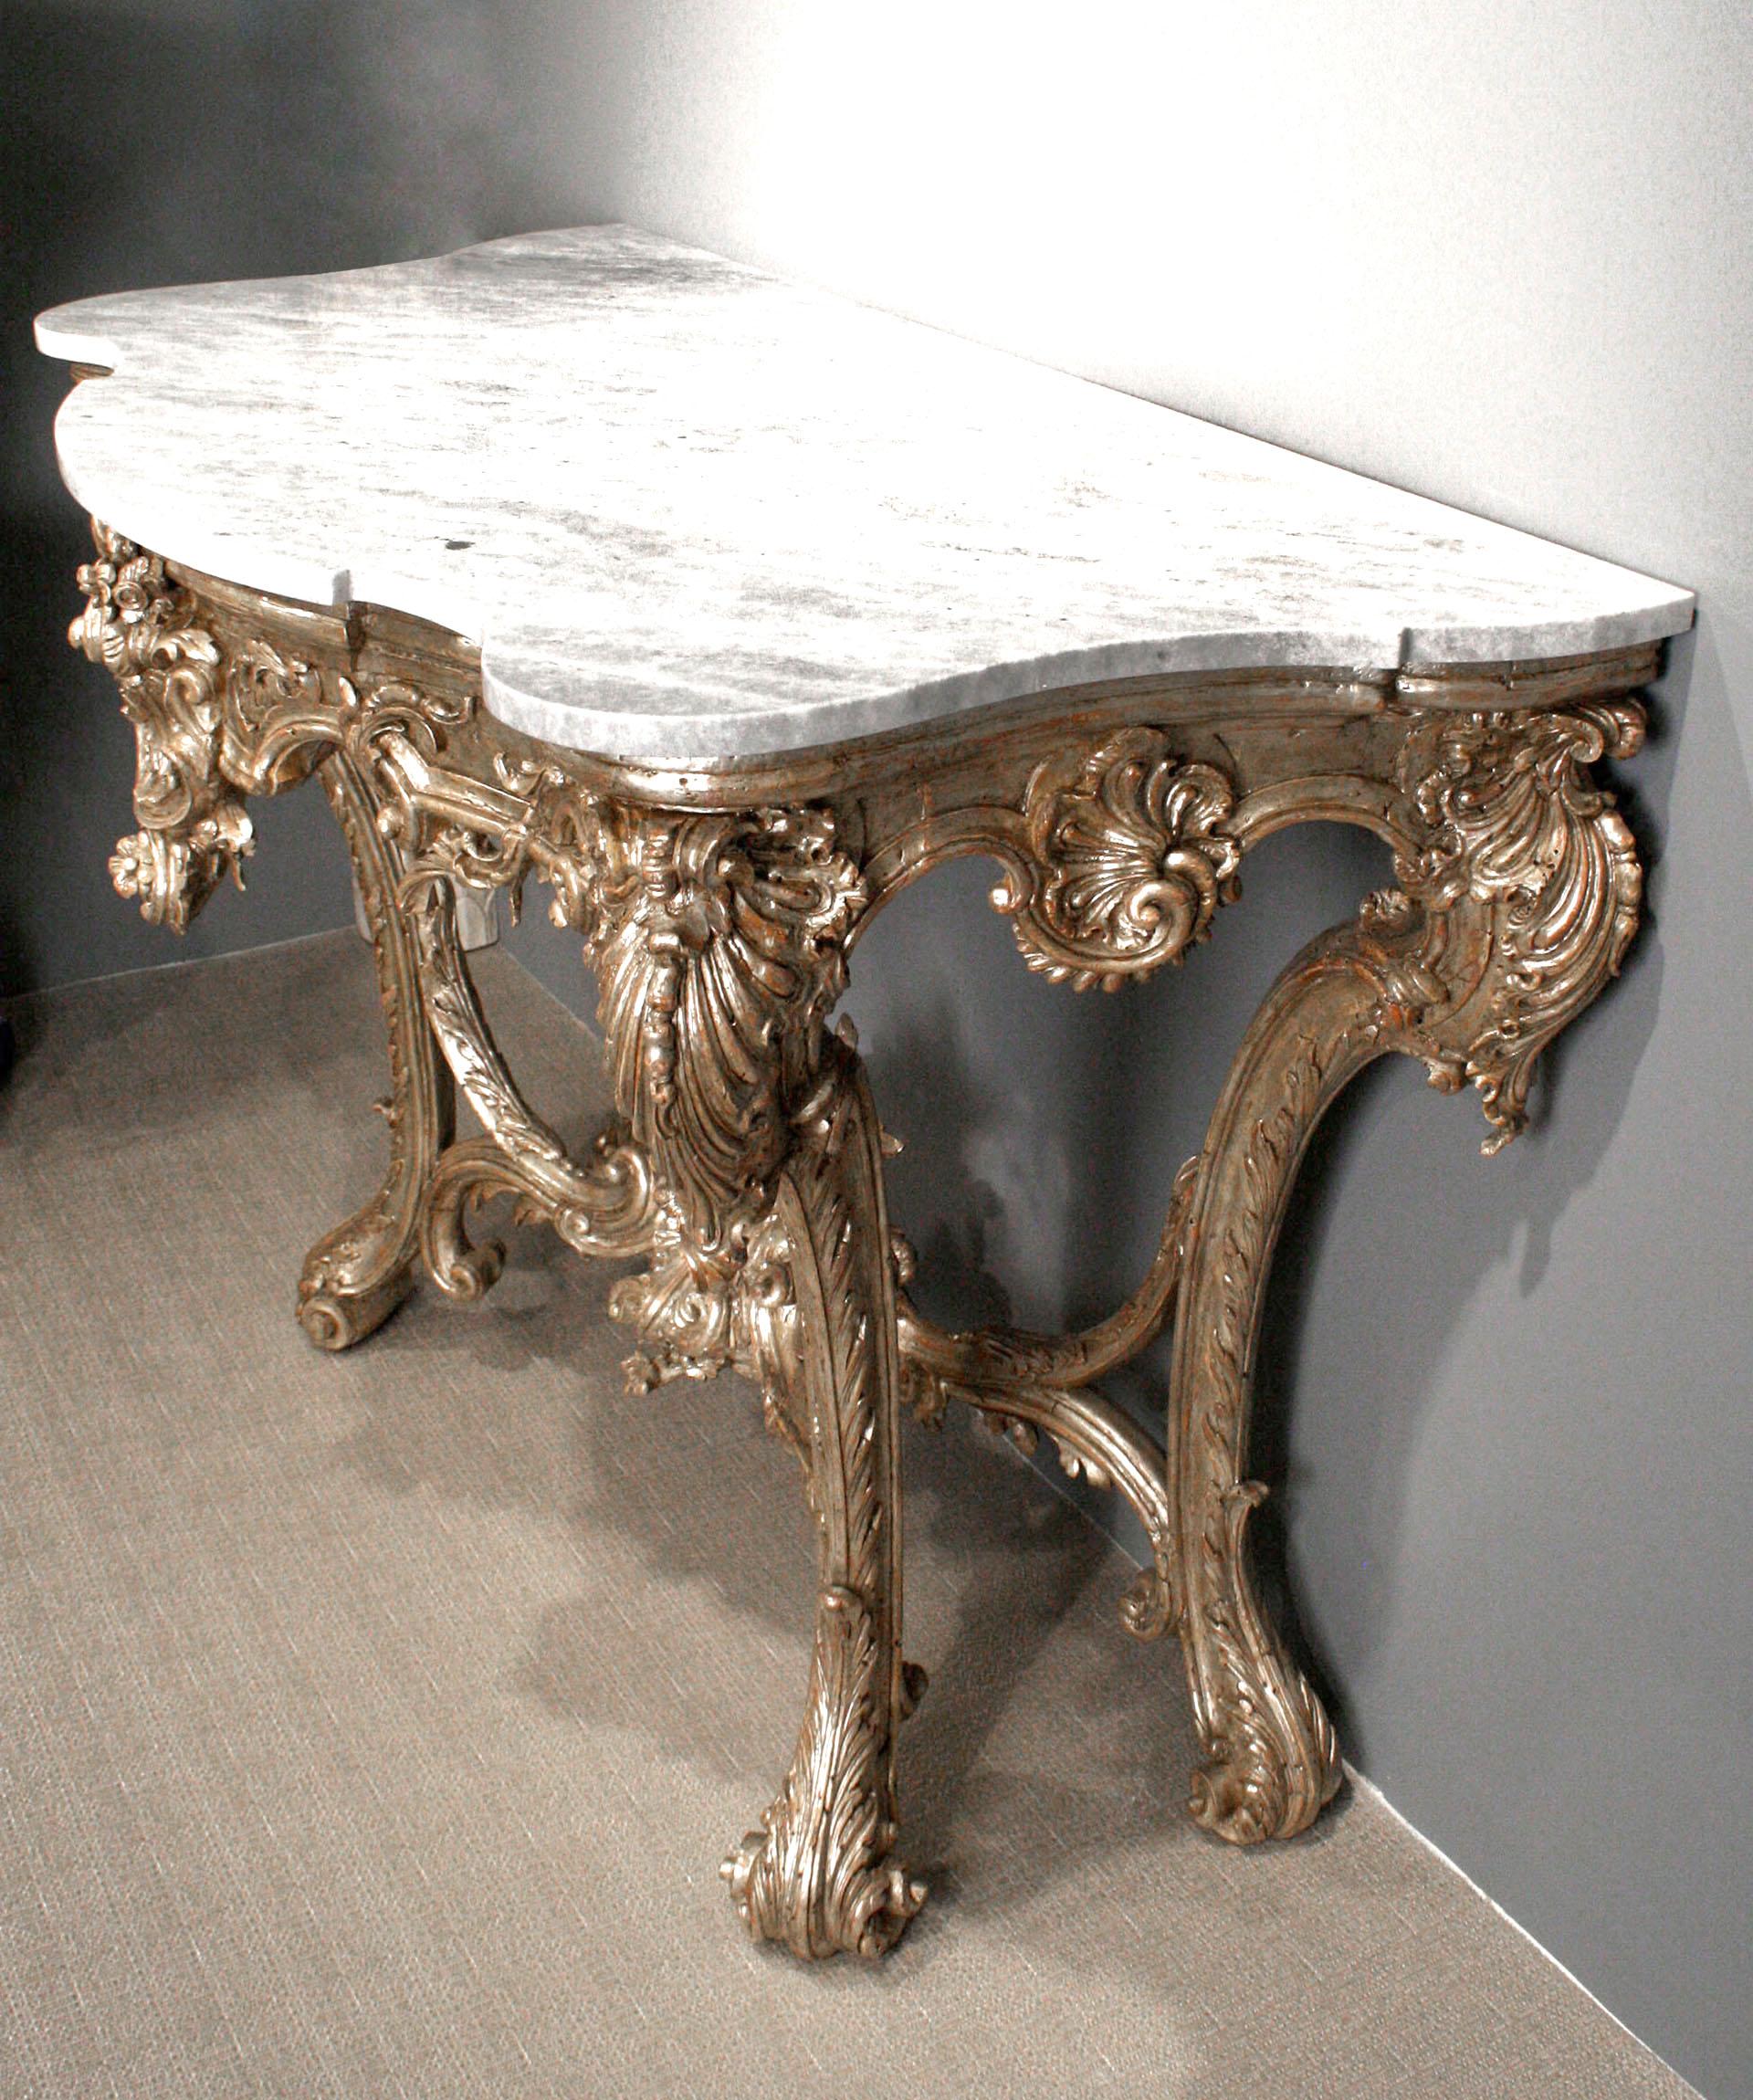 Gilt Superb Pair of 18th Century Italian Rococo Consoles with Marble Tops